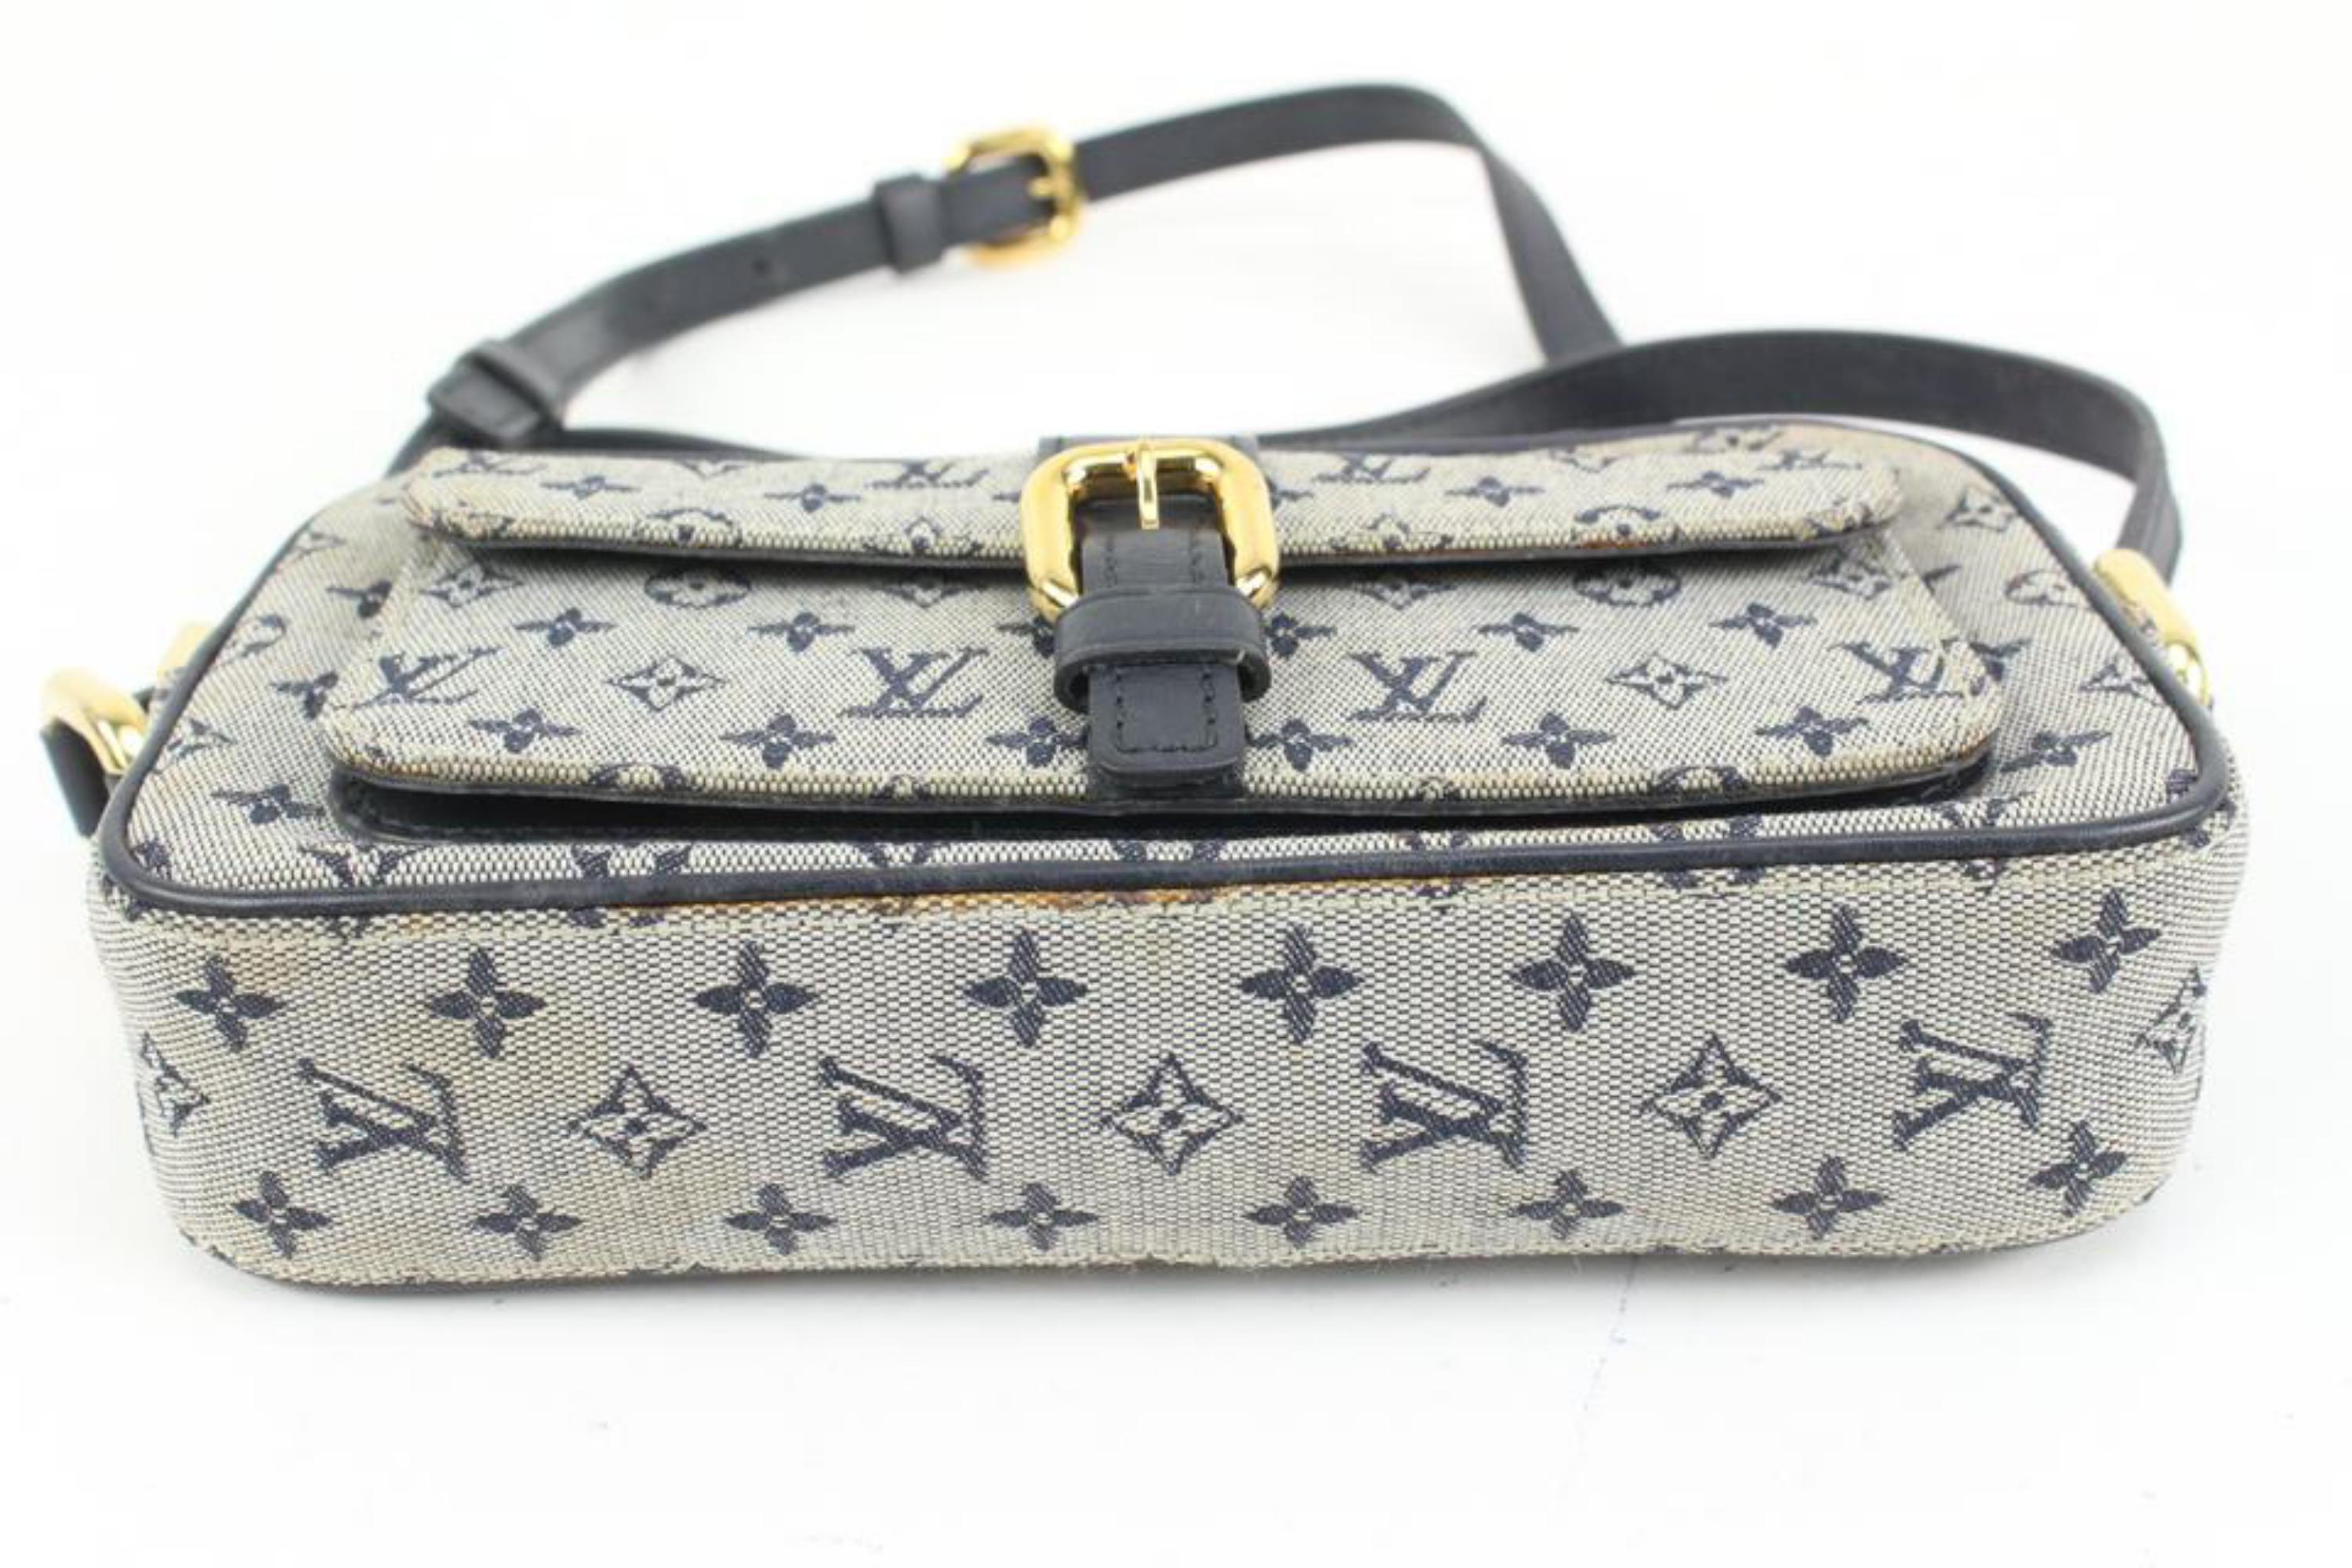 Louis Vuitton Grey x Navy Monogram Mini Lin Juliette MM Crossbody Bag 83lz418s
Date Code/Serial Number: TH1022
Made In: France
Measurements: Length:  8.2